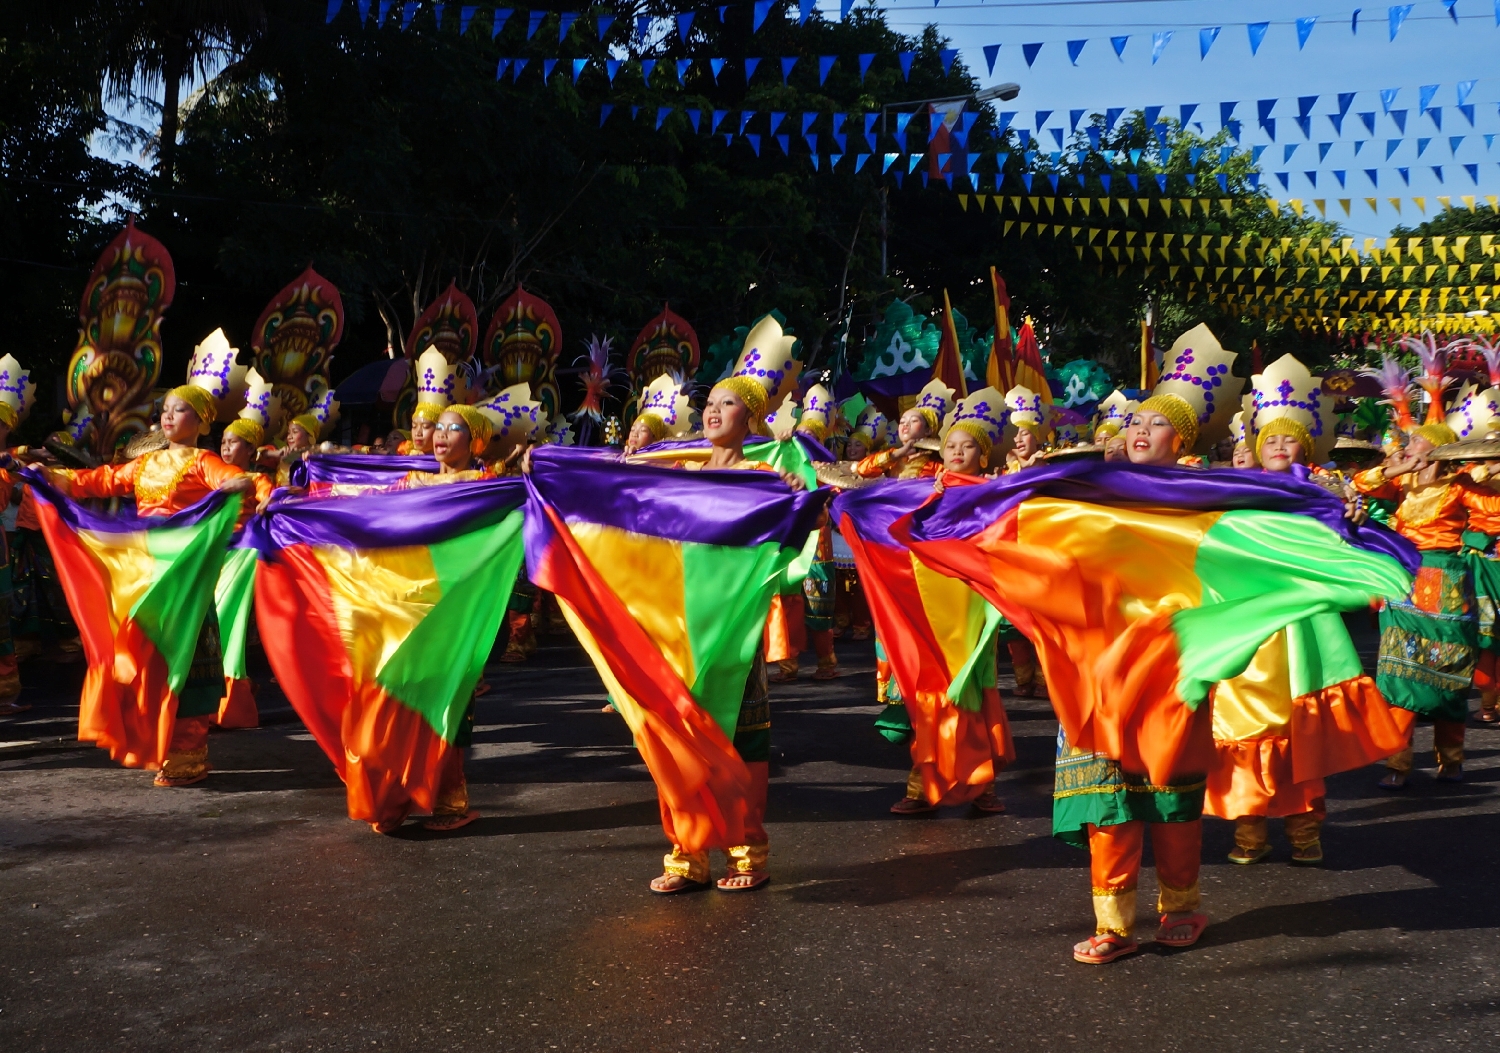 Tnalak Festival Street Dancing Competition is one of the most colorful in Mindanao